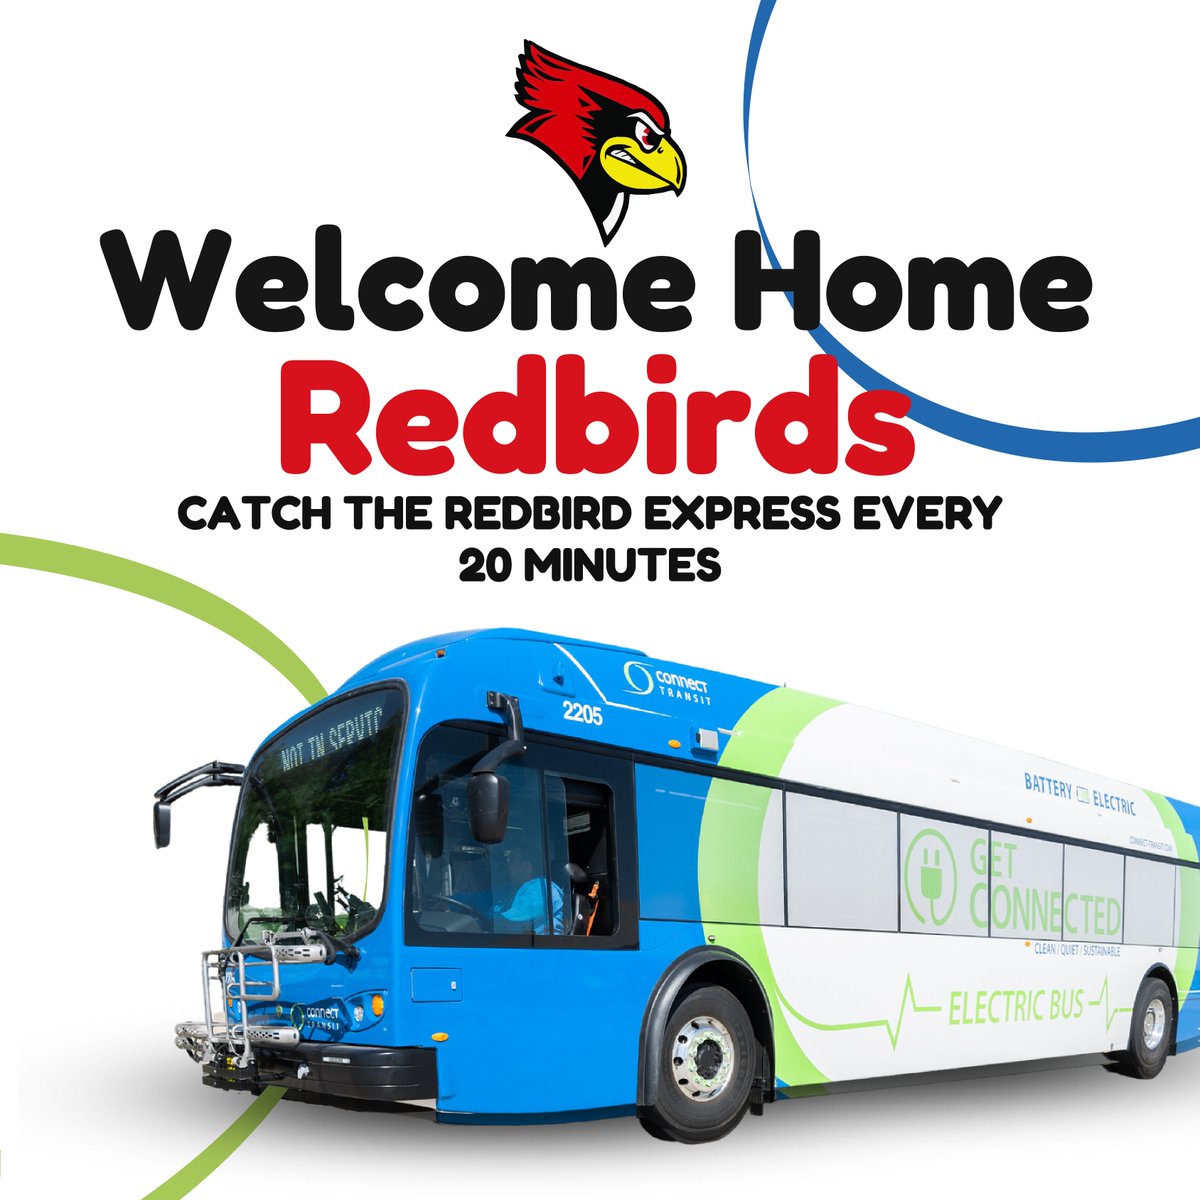 Welcome home Redbirds!! Remember - you ride for free with your student ID. Just give it a swipe when you board the bus and you are good to go. The Redbird Express will run every 20 minutes this week and will run on it's regular schedule starting Monday. Here's to a great year!!